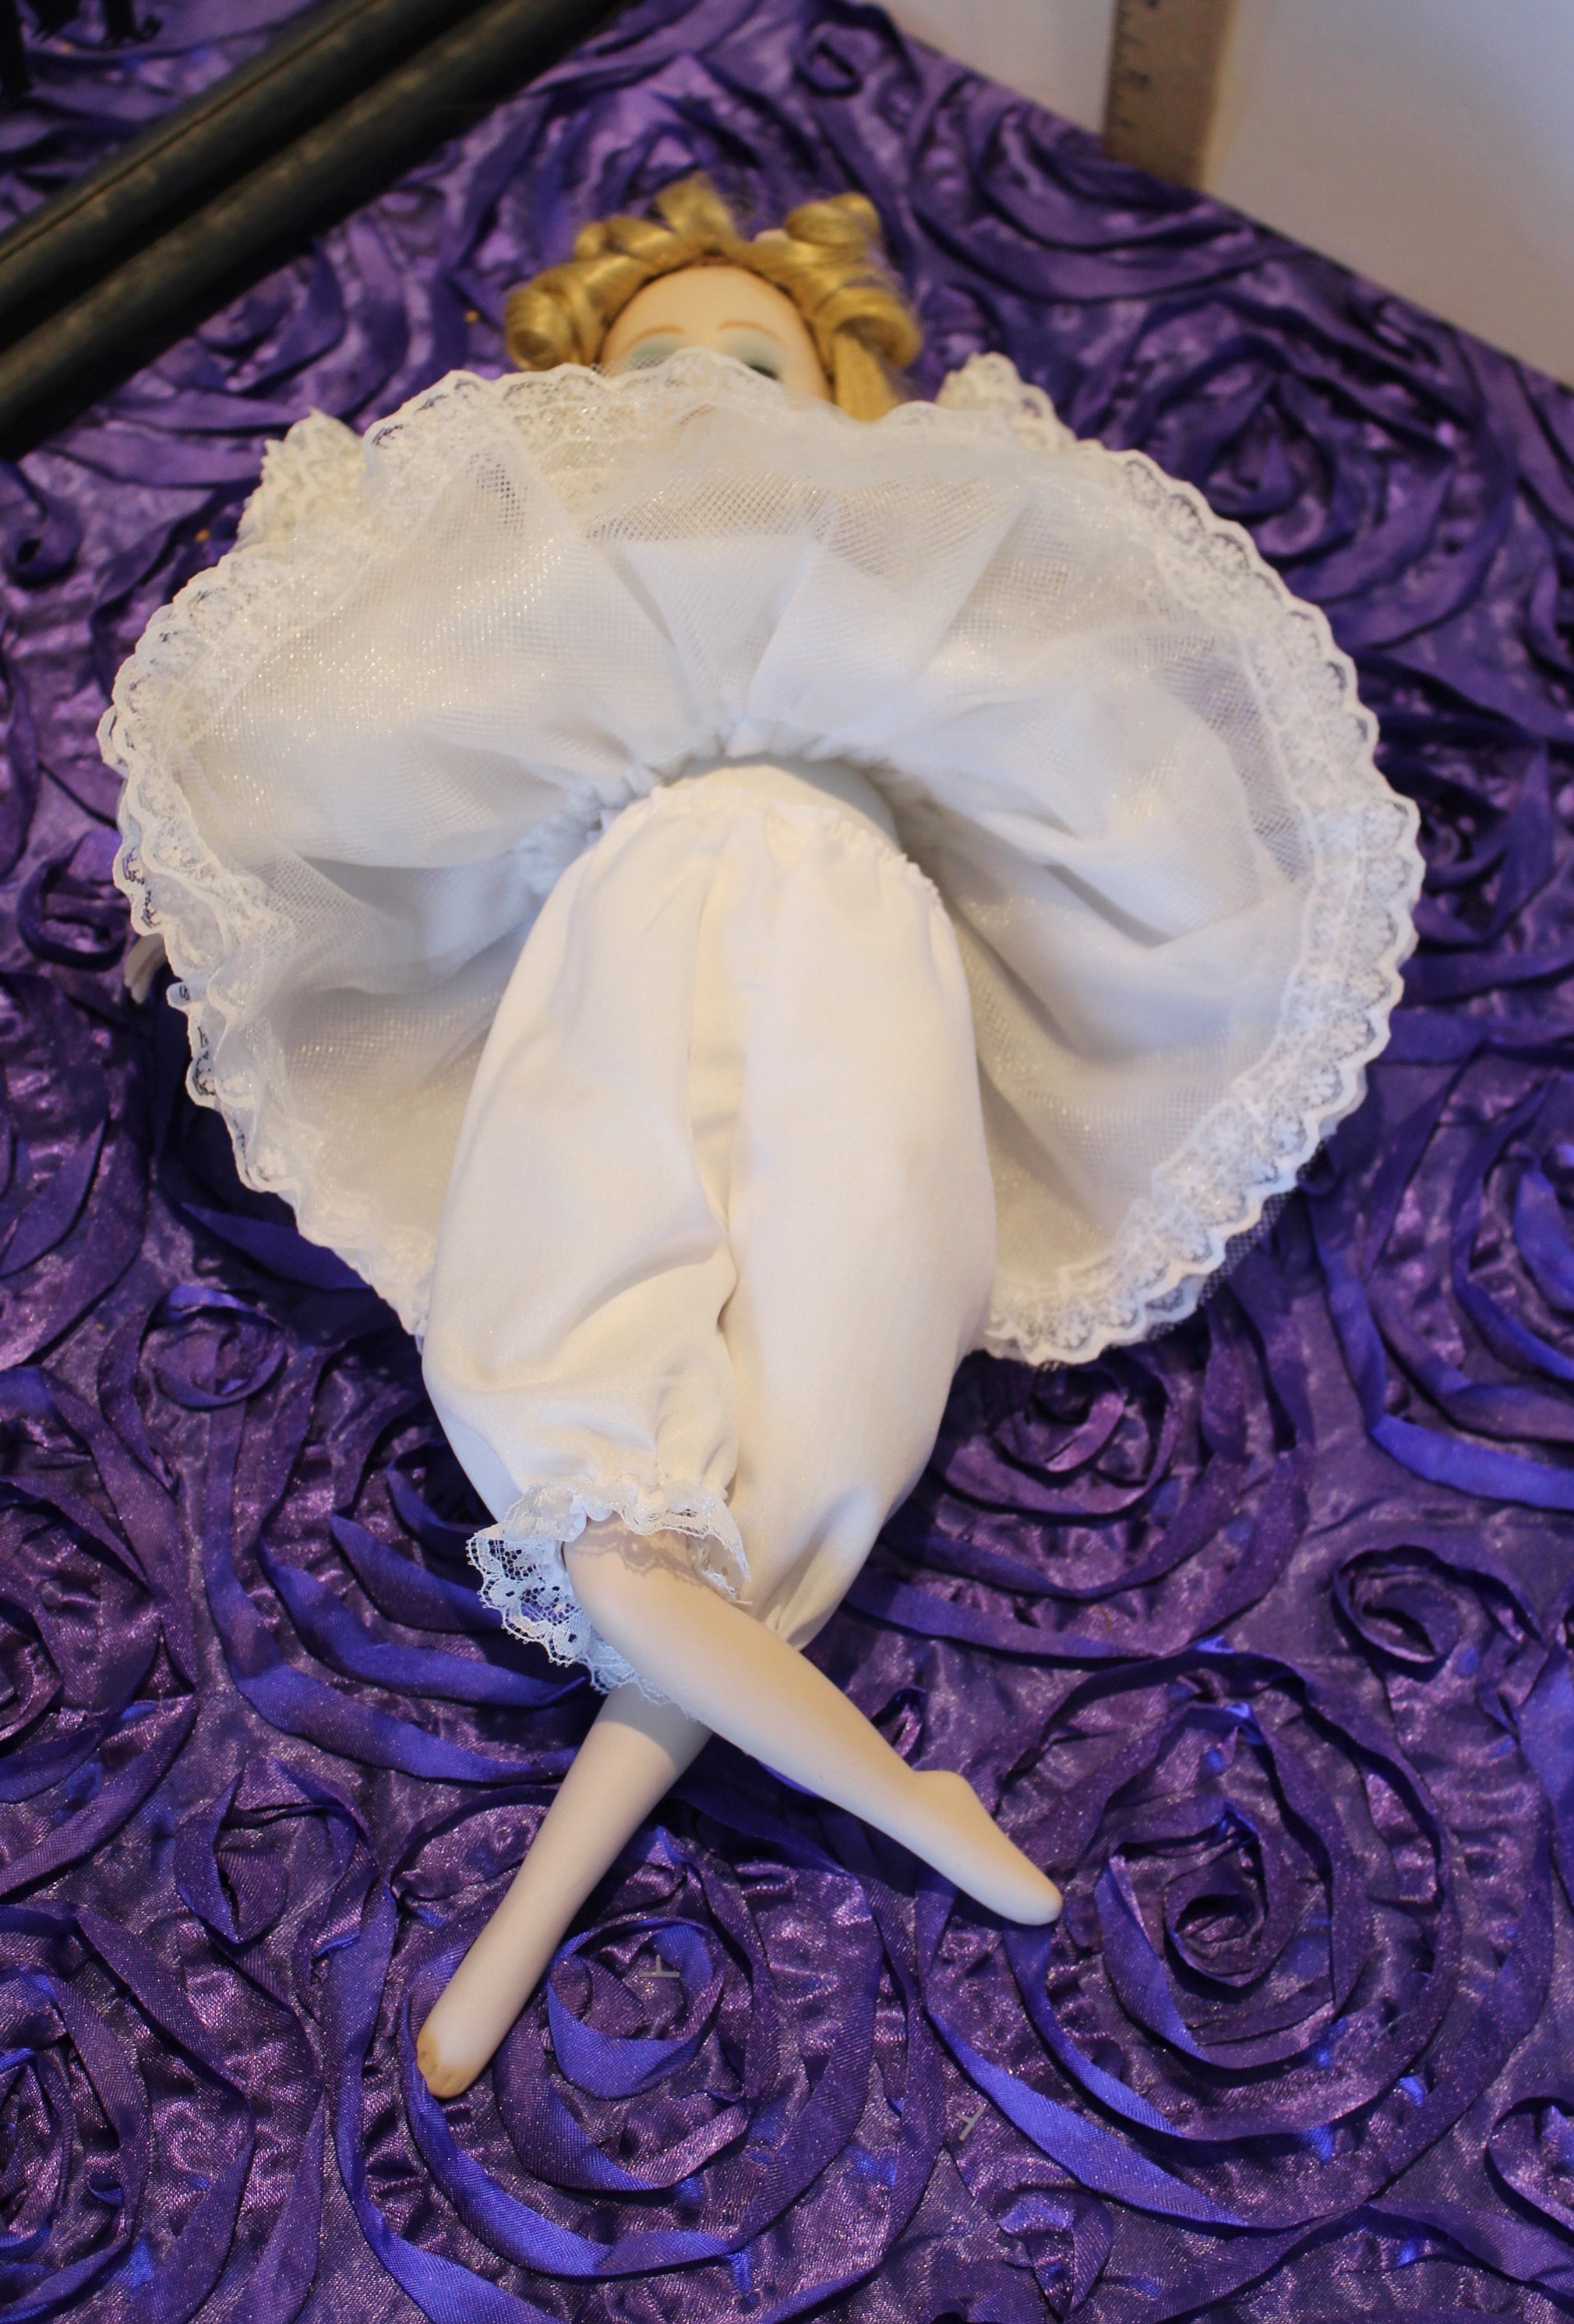 Faye - Ballerina Haunted Doll - Teaches Discipline, Dance, and Helps with Talents